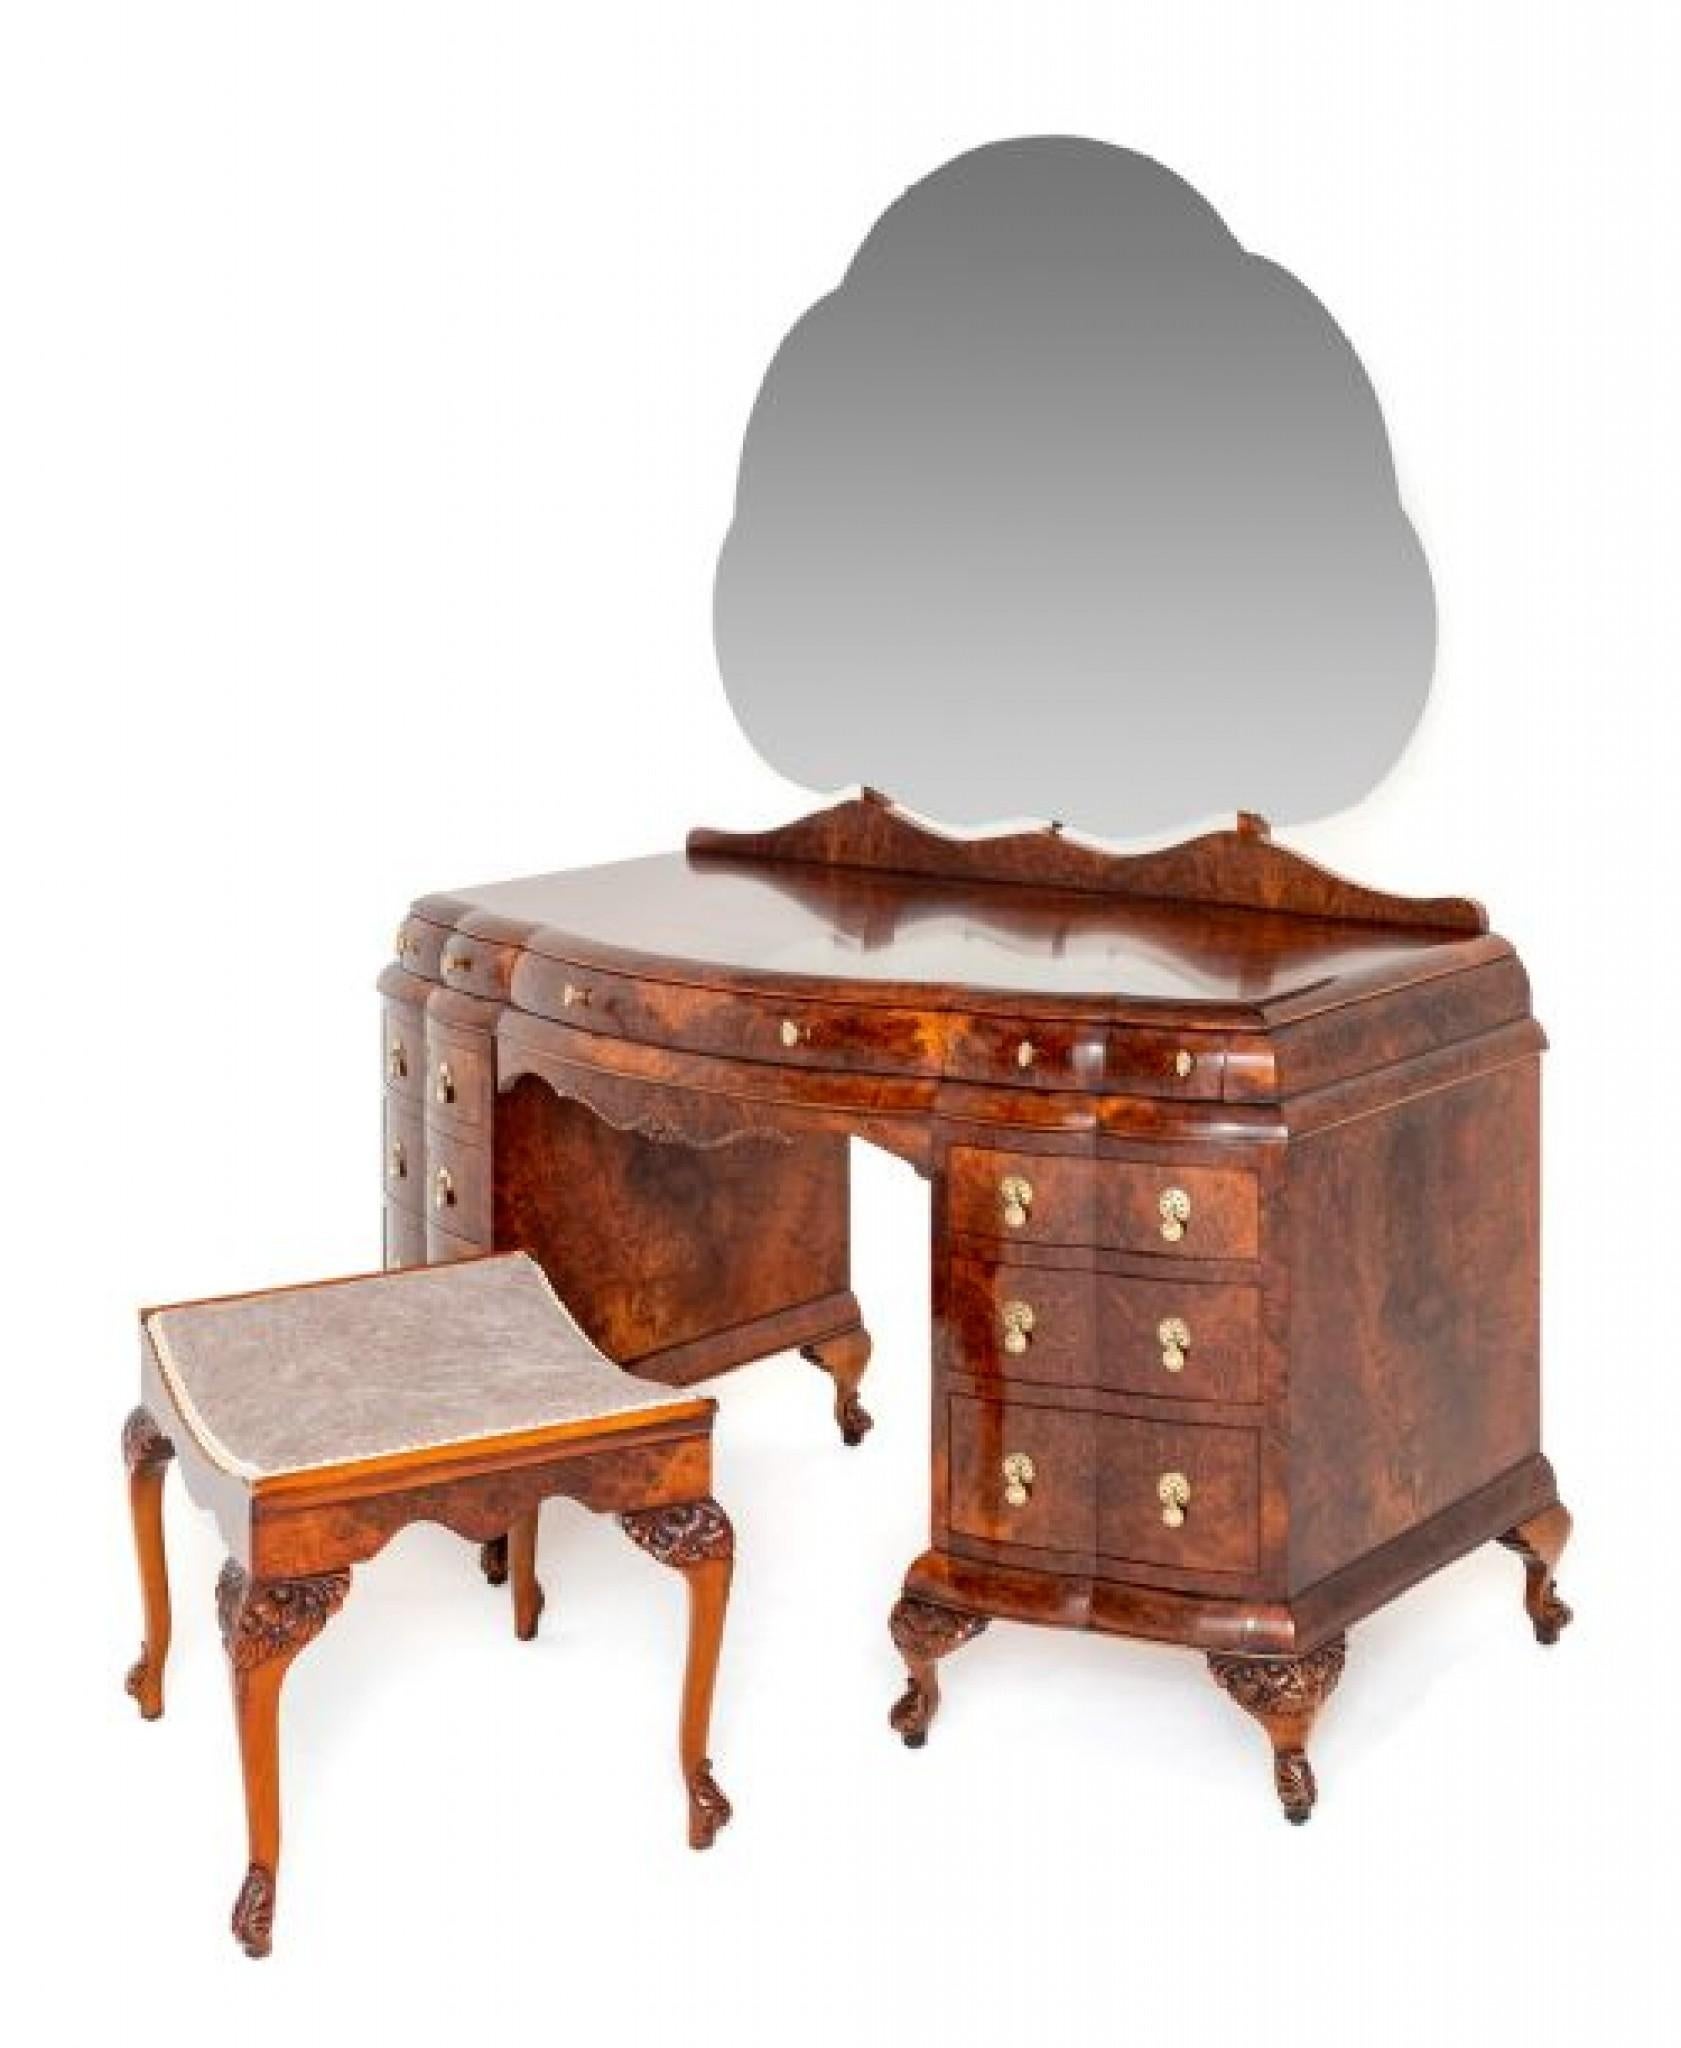 Fantastic Art Deco Burr Walnut Bedroom Suite.
This Superb Suite Comprises of a Triple Wardrobe, Double Wardrobe, Dressing Table, Stool, Bedside Cabinet and Double Bed.
The Suite is Constructed from The Finest Burr Walnut Veneers.
Having Solid